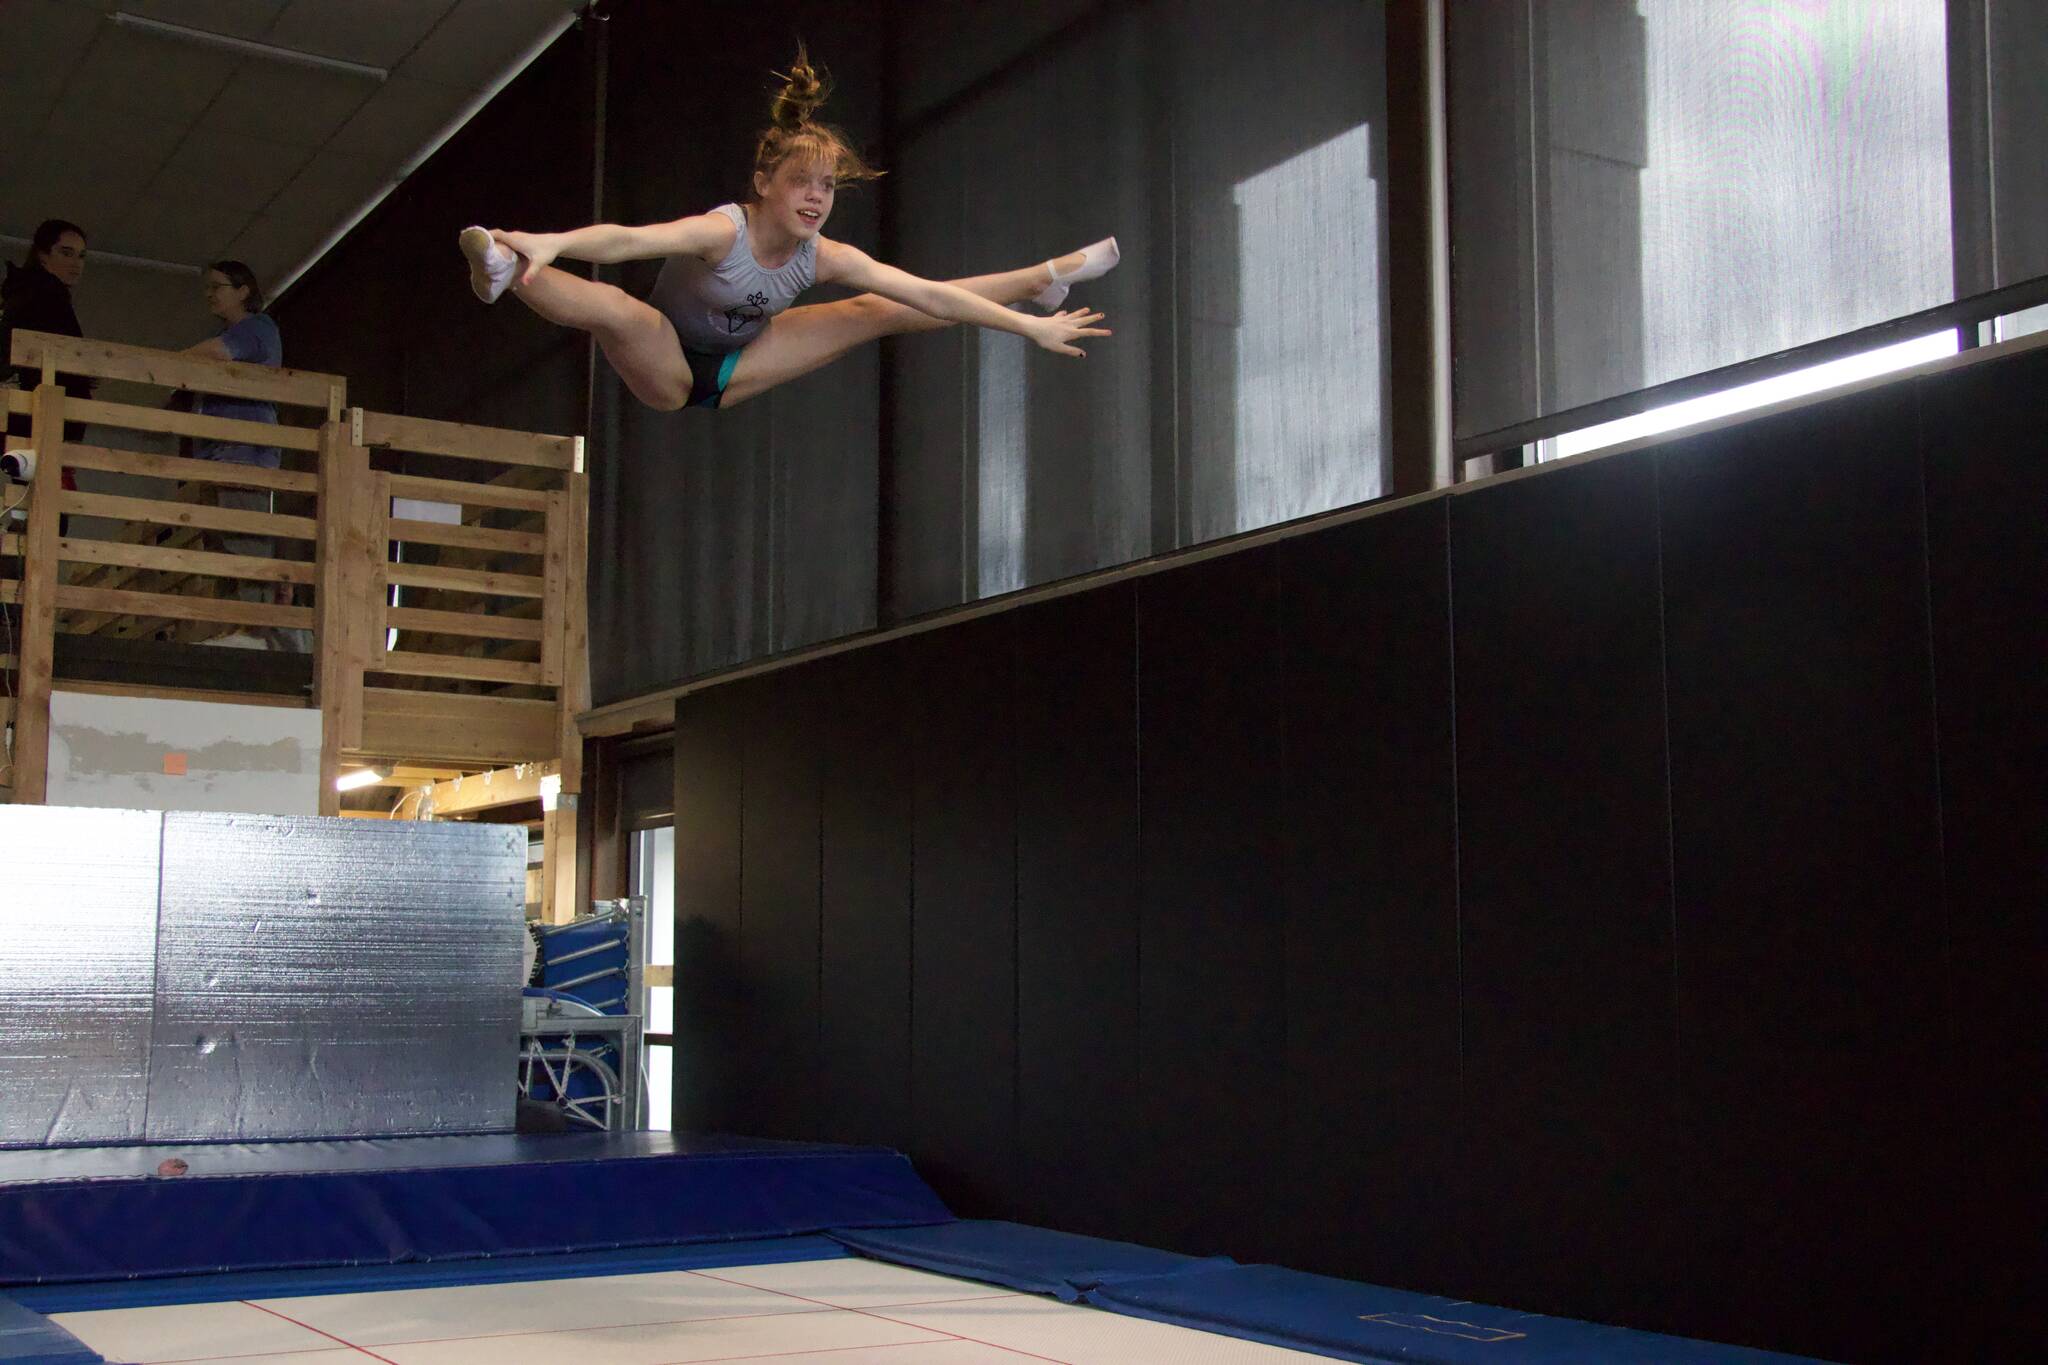 Malaina Yargo, 14, straddle jumps on a trampoline. Yargo is a national qualifier in double mini. (Photo by Rachel Rosen/Whidbey News-Times)